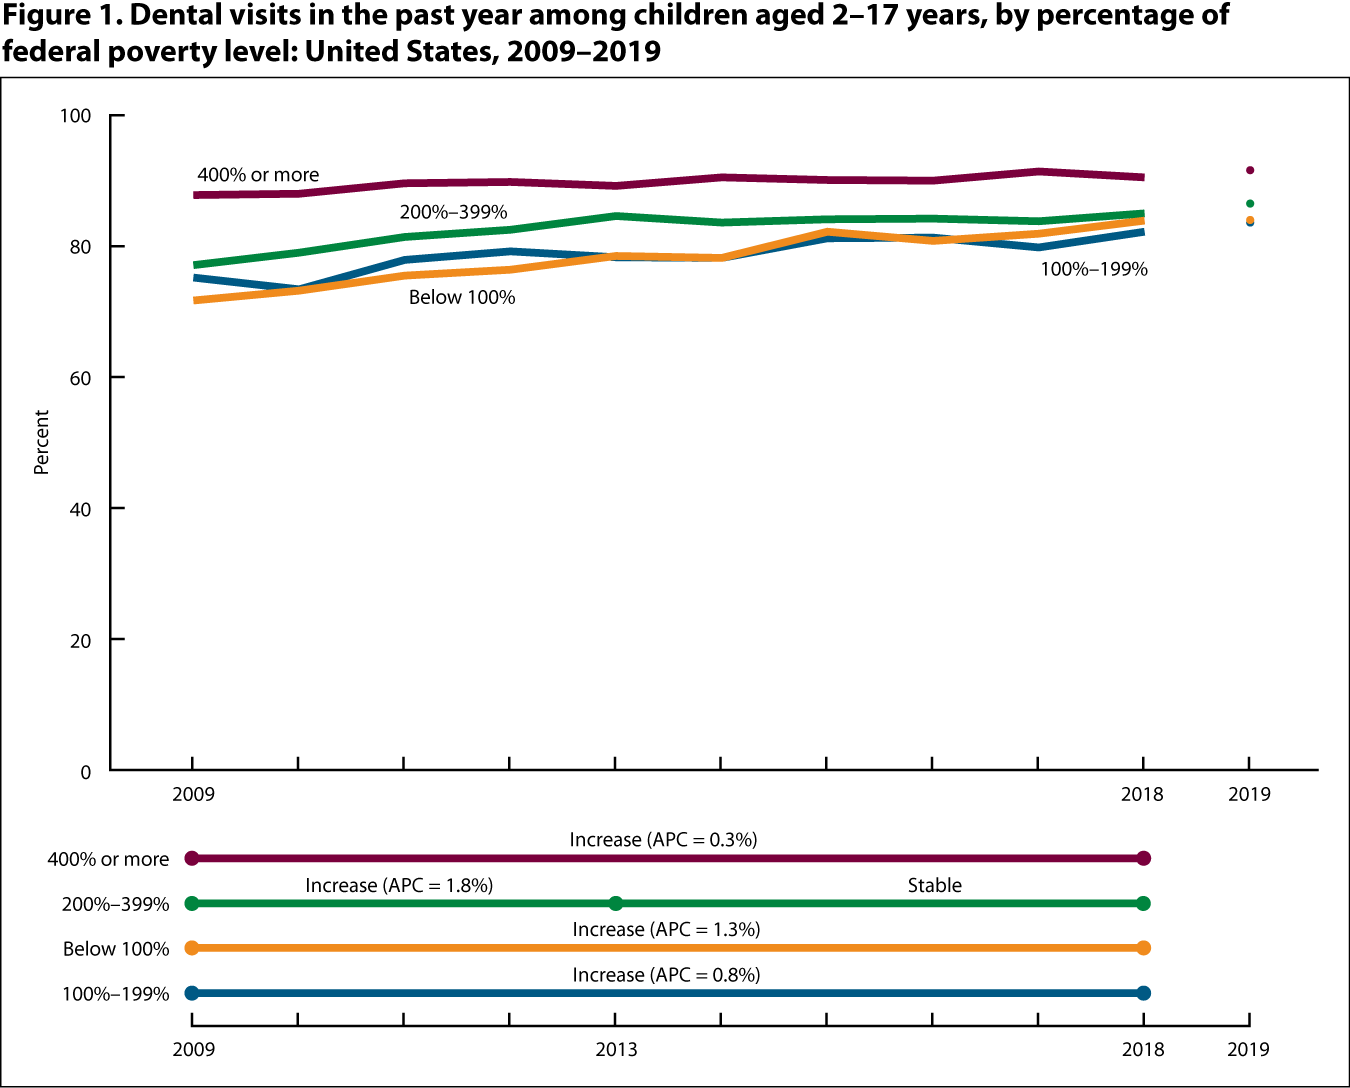 Figure 1 is a line graph showing the percentage of children aged 2–17 years with a dental visit in the past year, by percentage of federal poverty level for 2009 through 2018 and at 2019 (point).